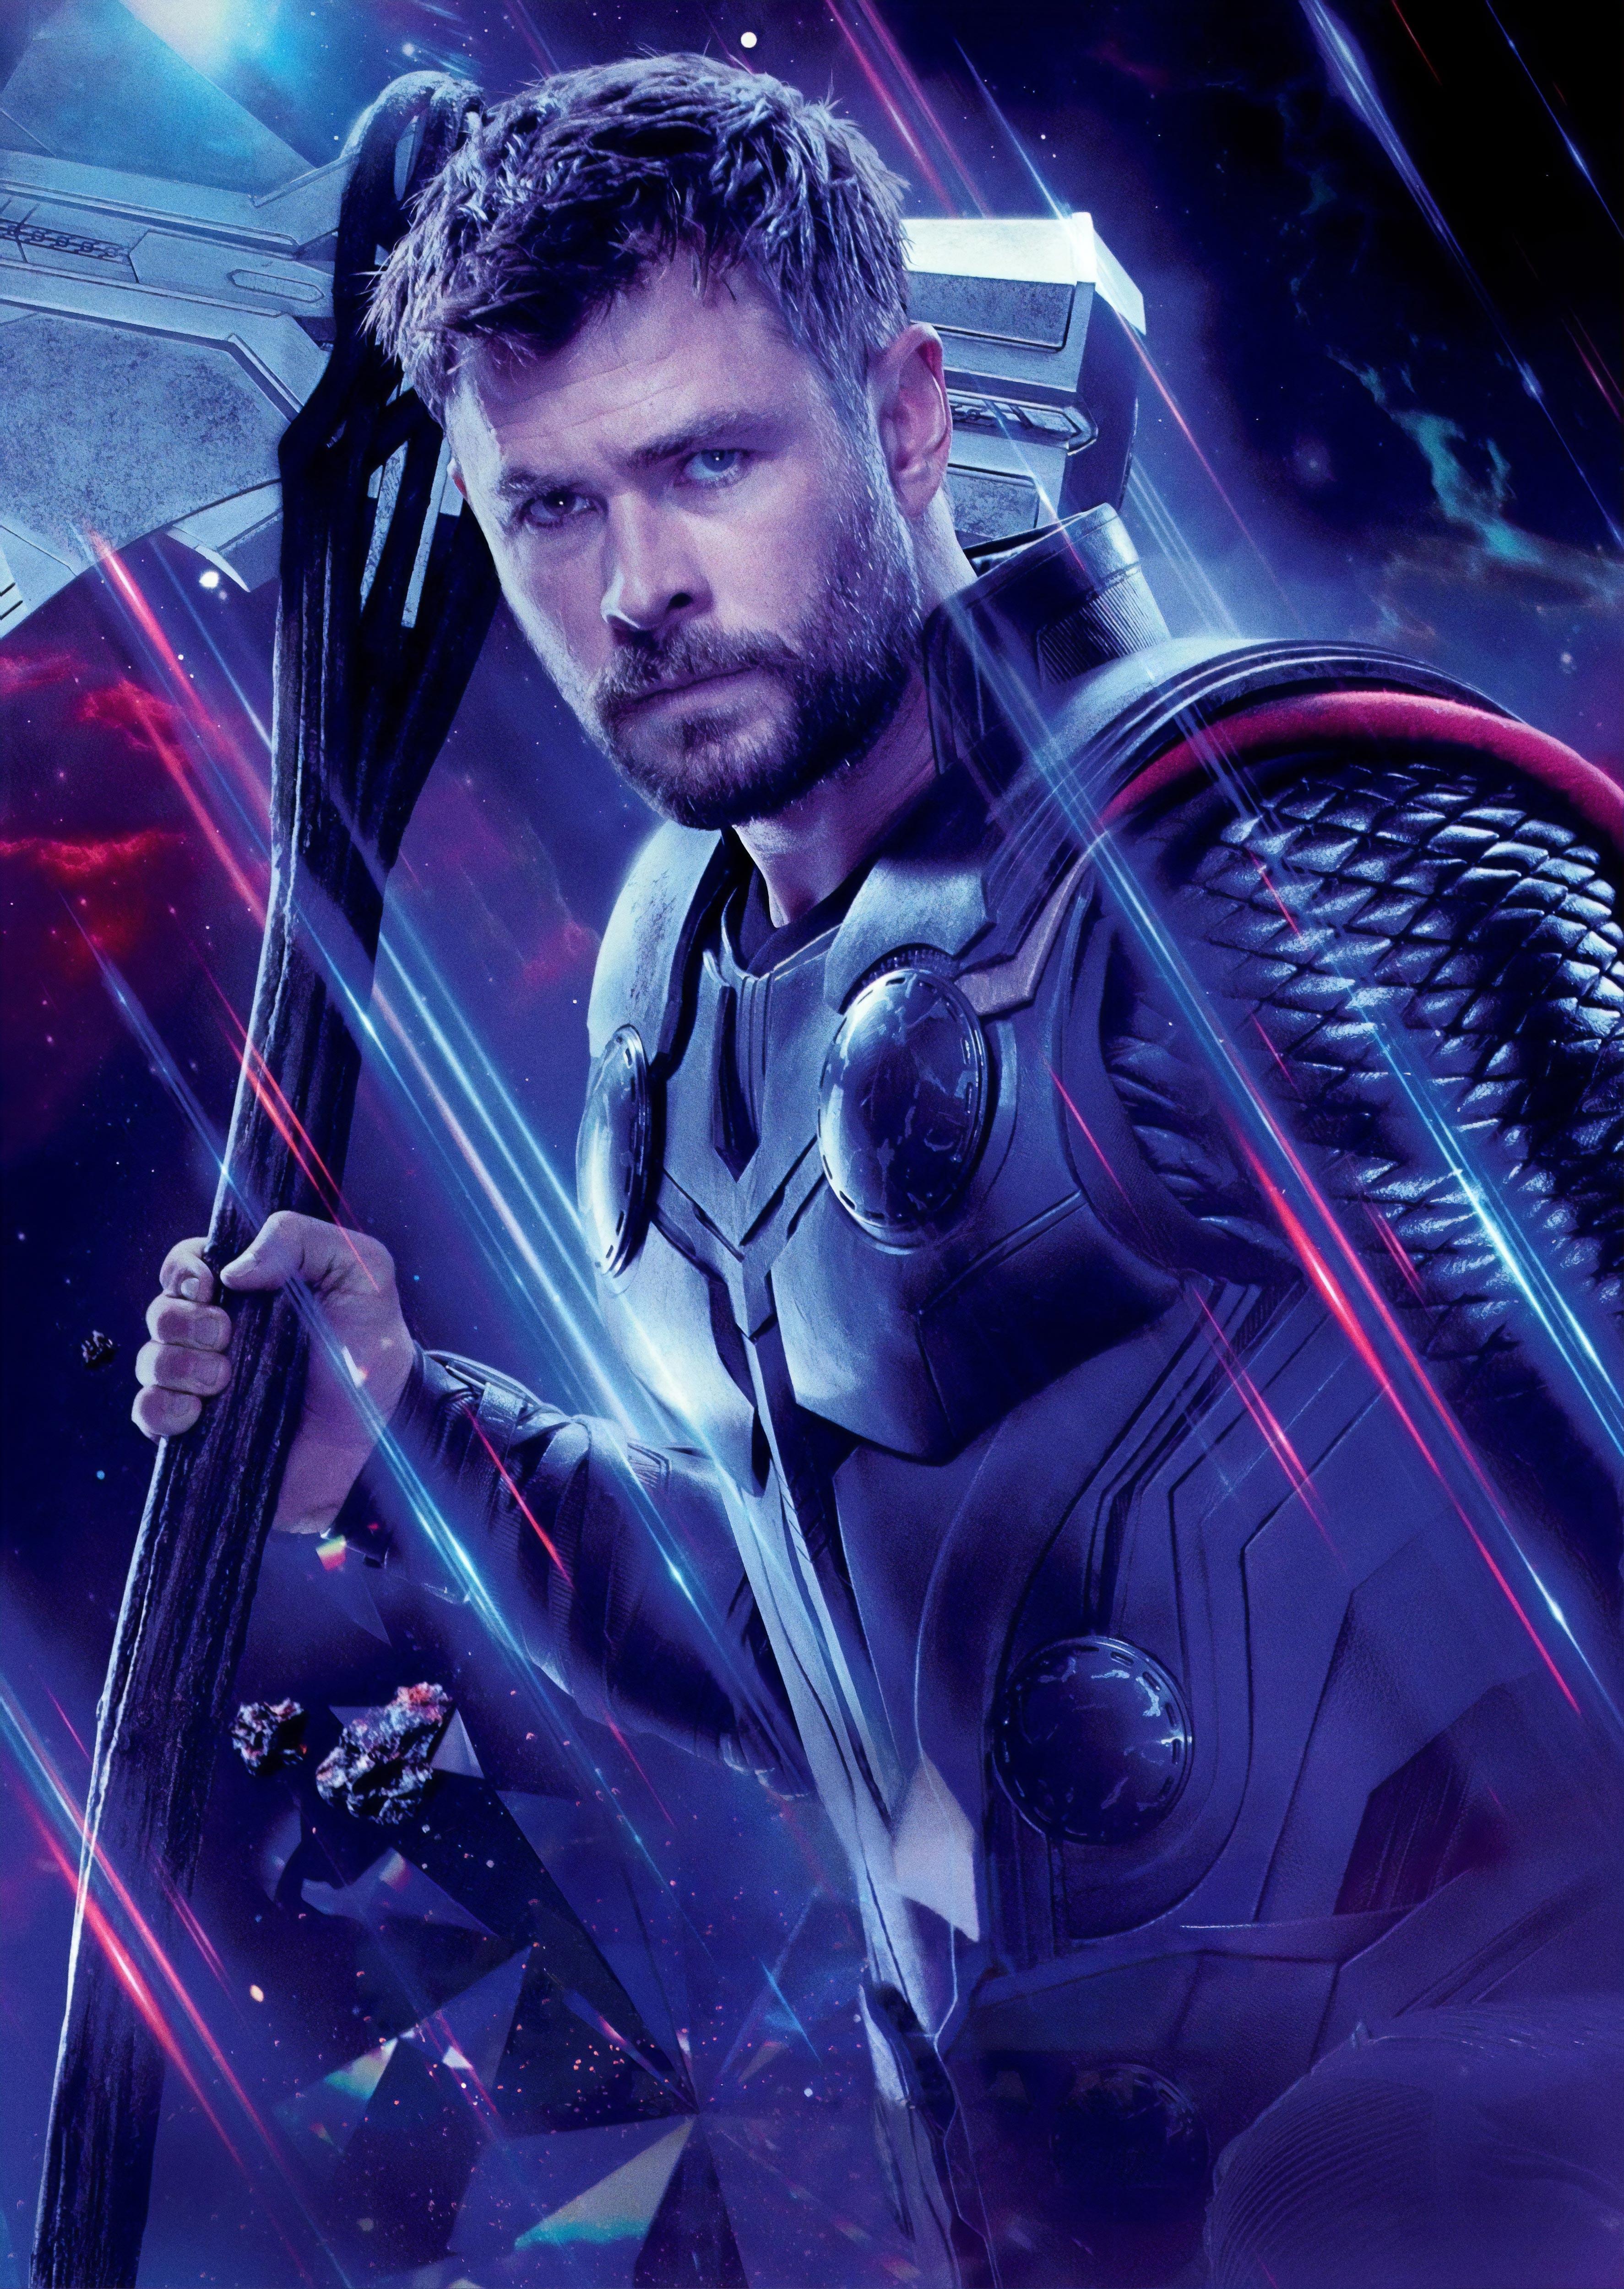 Thor in Avengers Endgame Wallpaper, HD Movies 4K Wallpapers, Image, Photos and Backgrounds